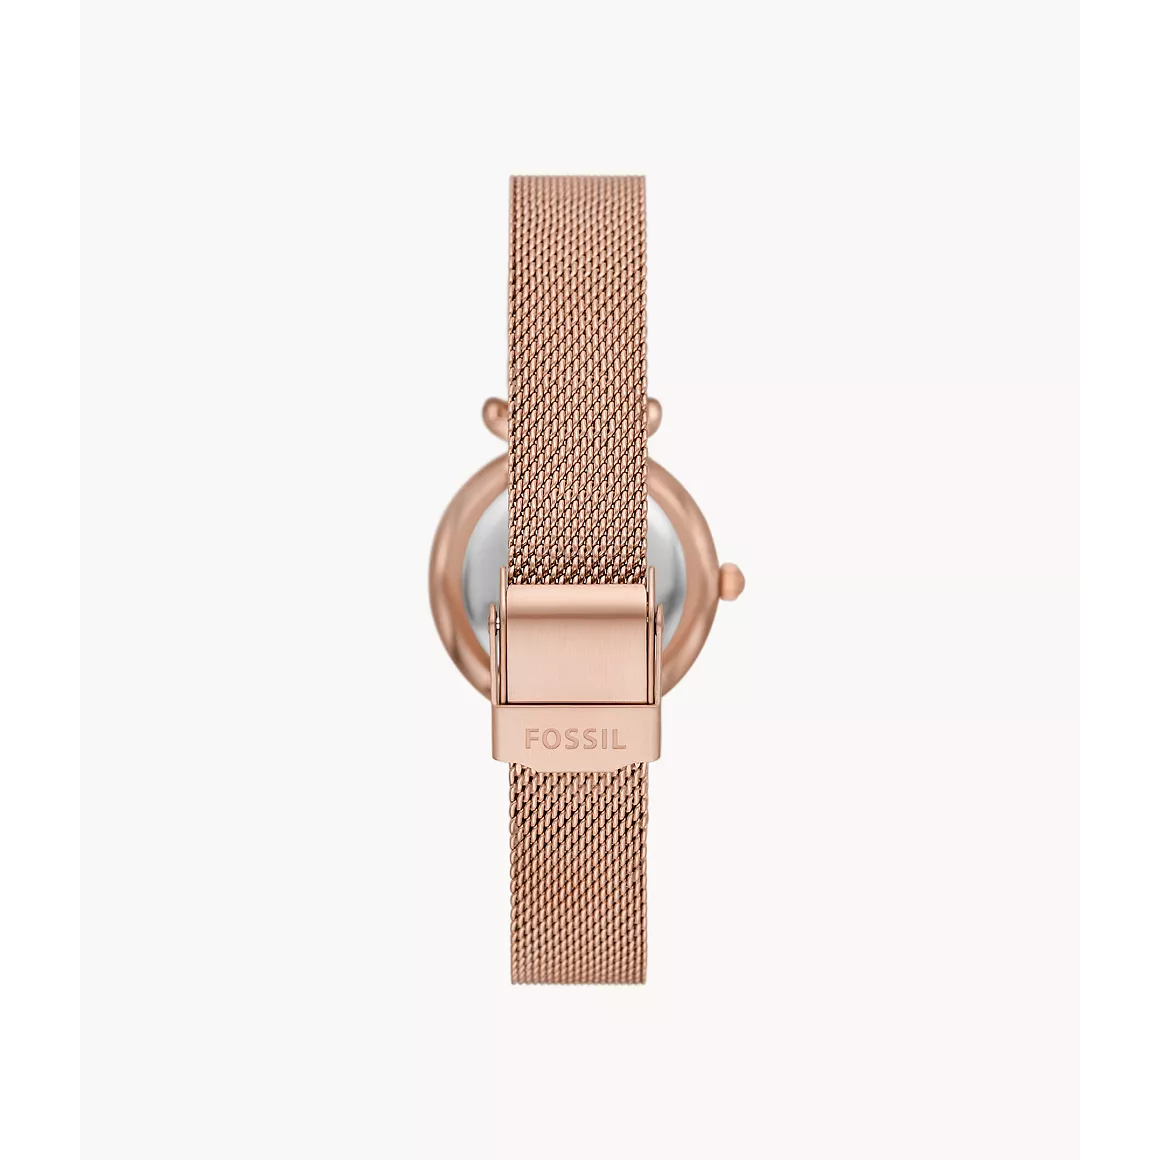 Fossil - Carlie Watch & Necklace Set